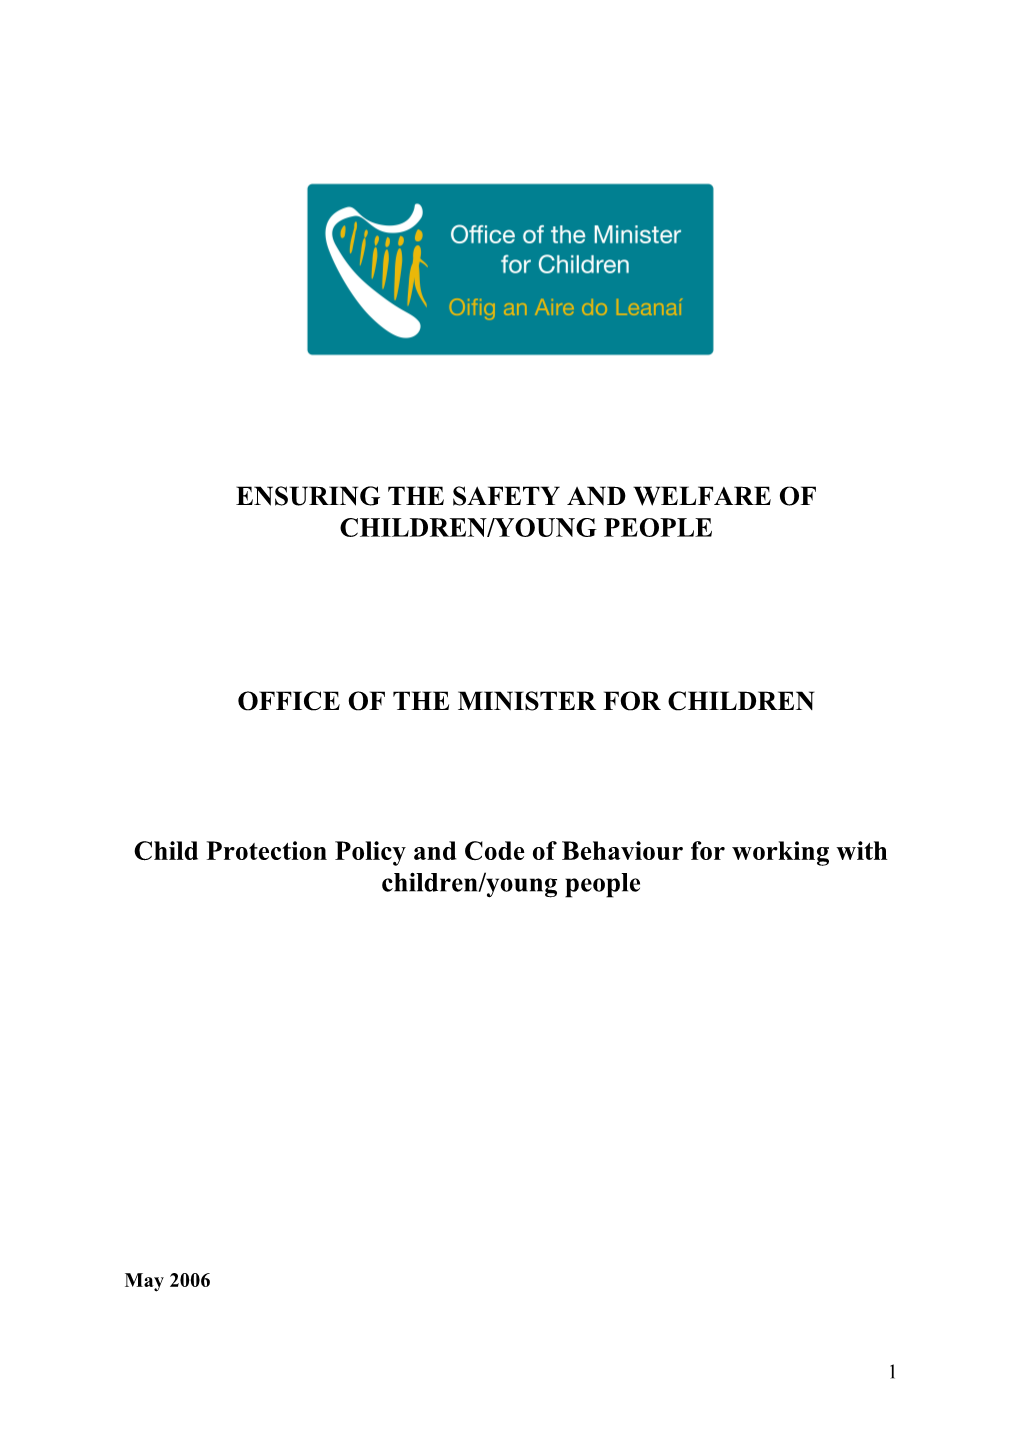 Ensuring the Safety and Welfare of Children/Young People